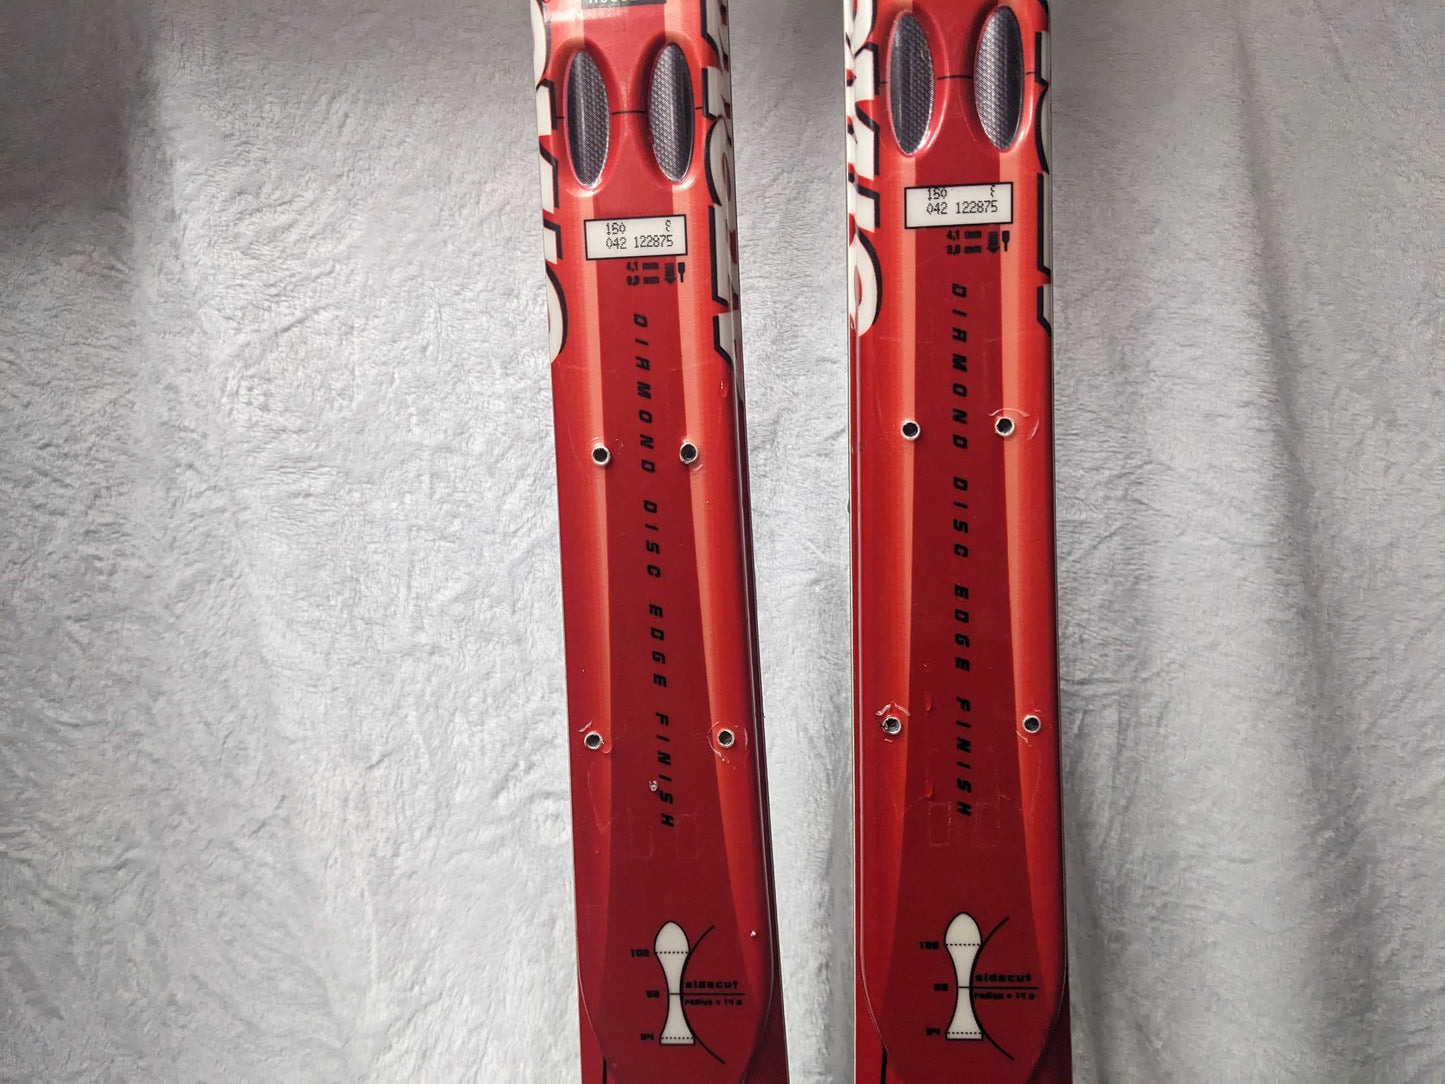 Atomic Beta CarvX 9.14 Skis *No Bindings* Size 160 Cm Color Red Condition Used